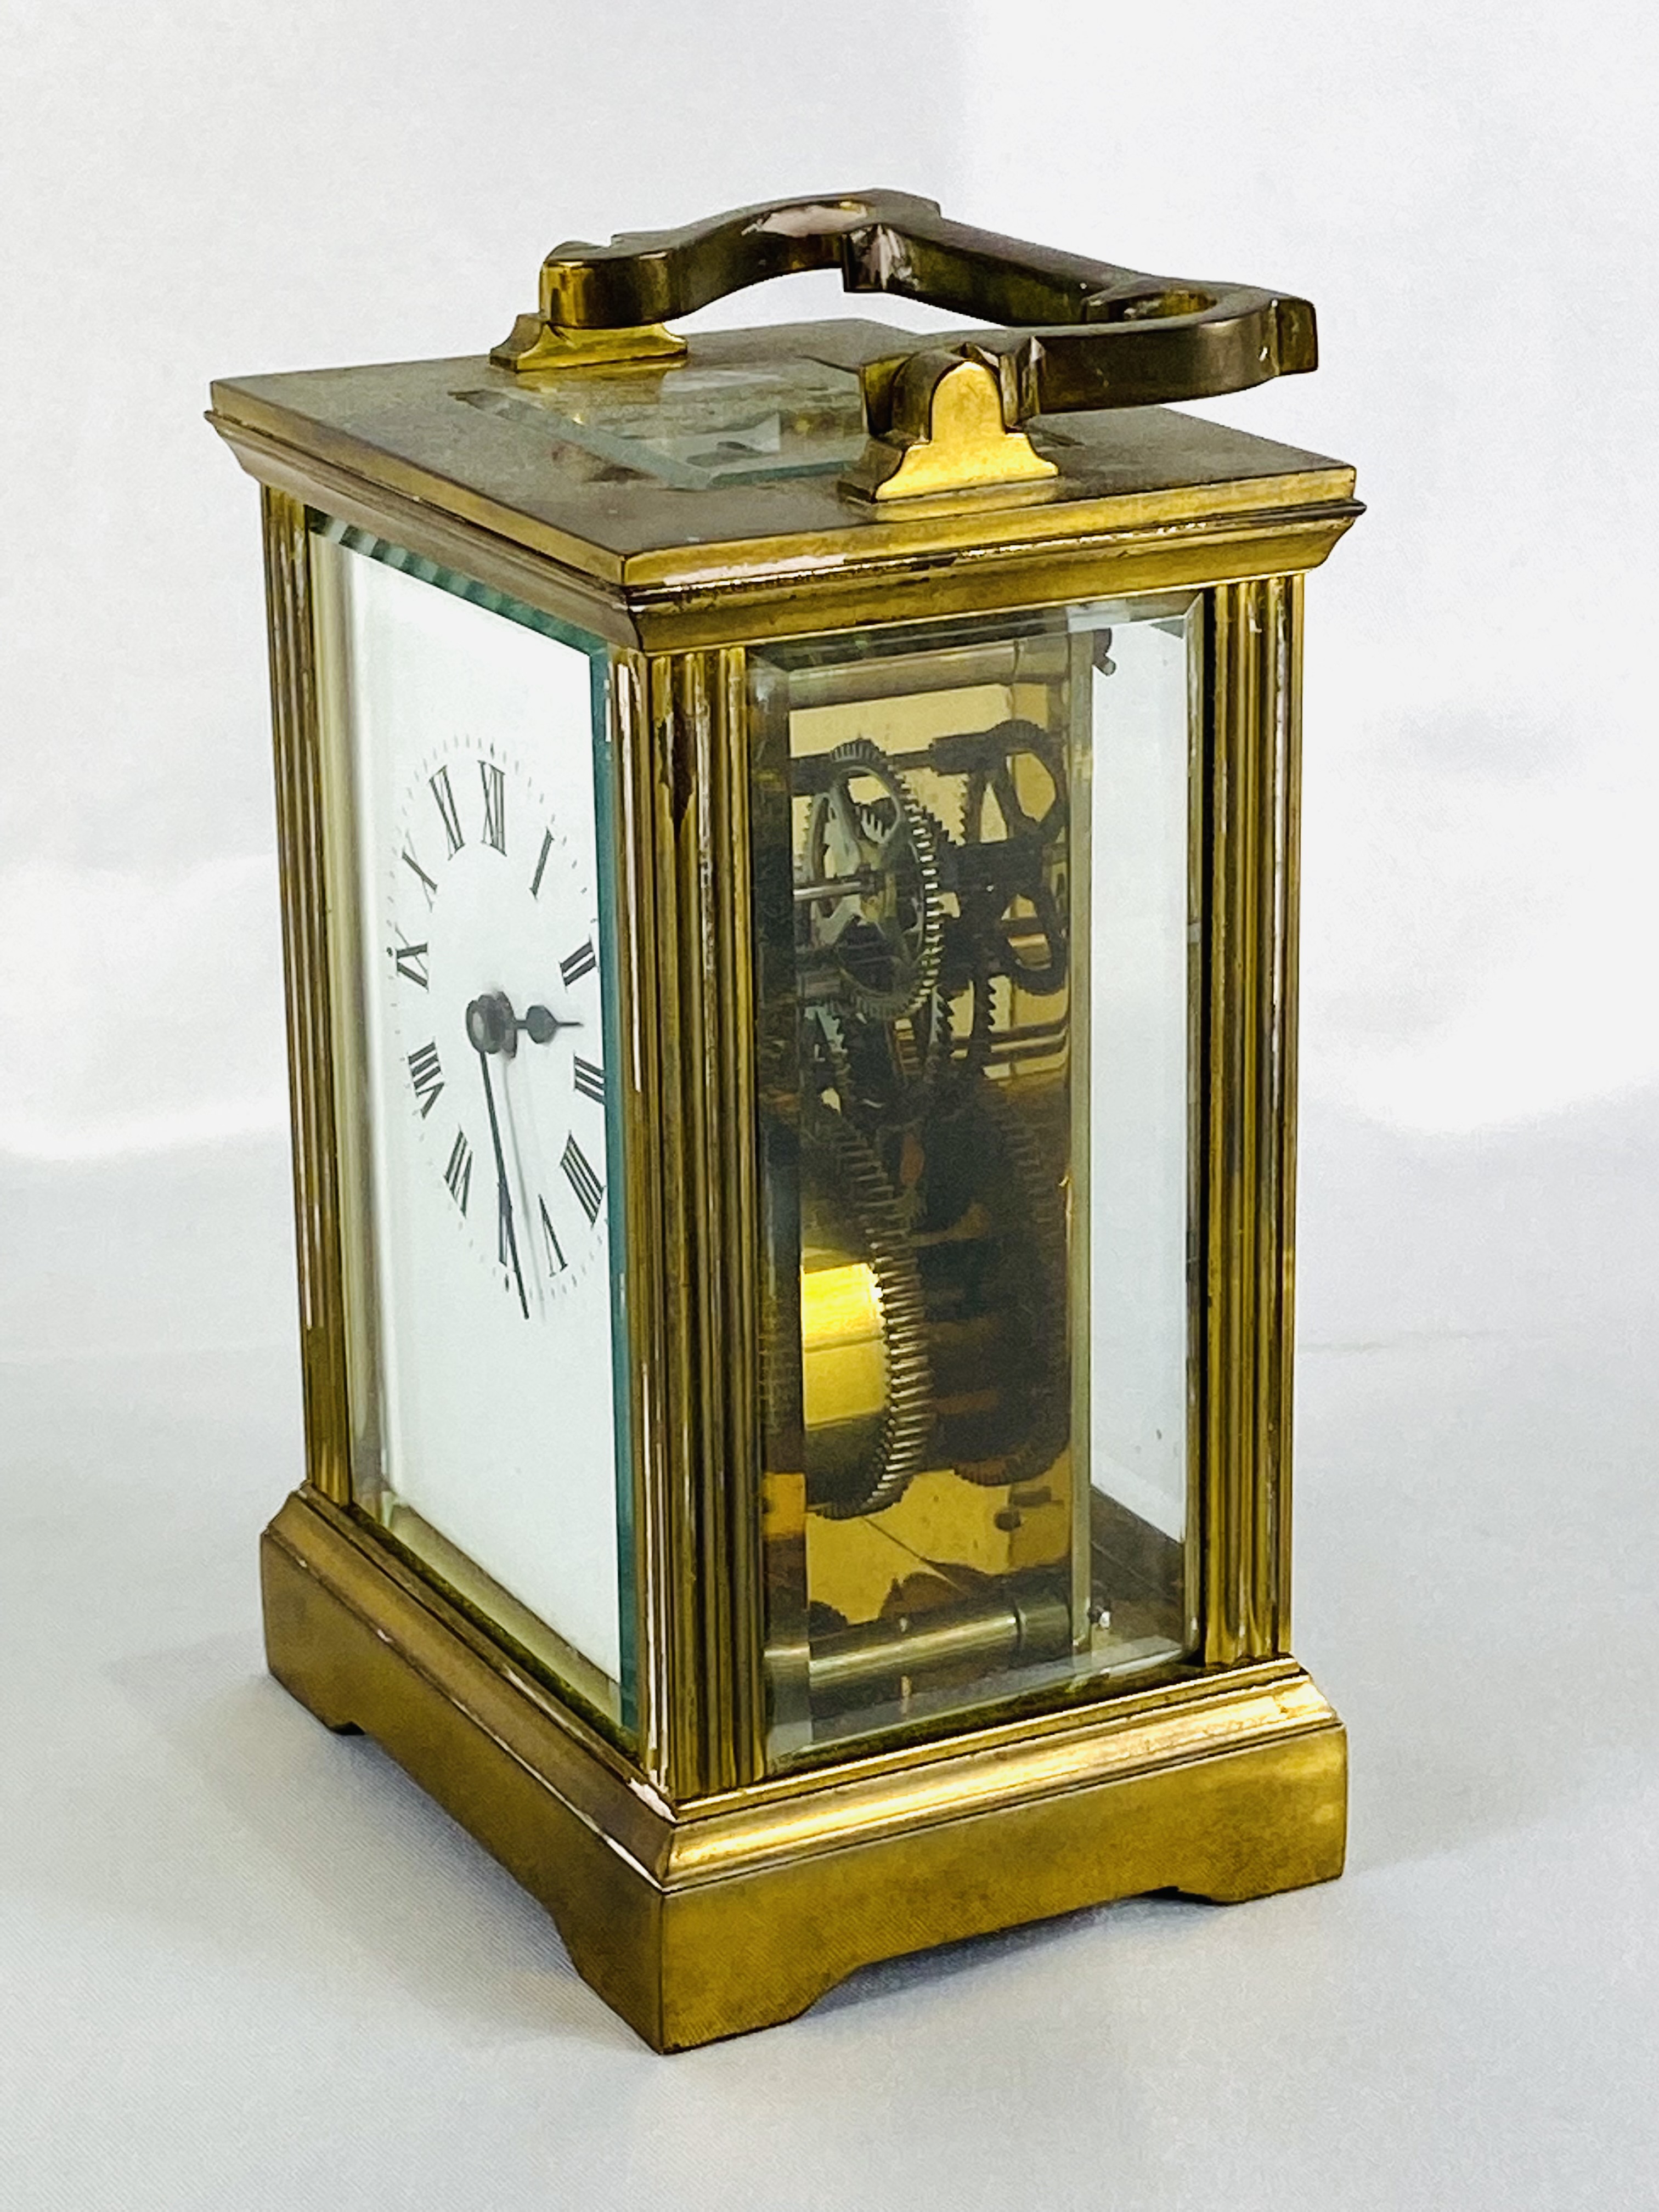 Brass cased carriage clock - Image 2 of 4